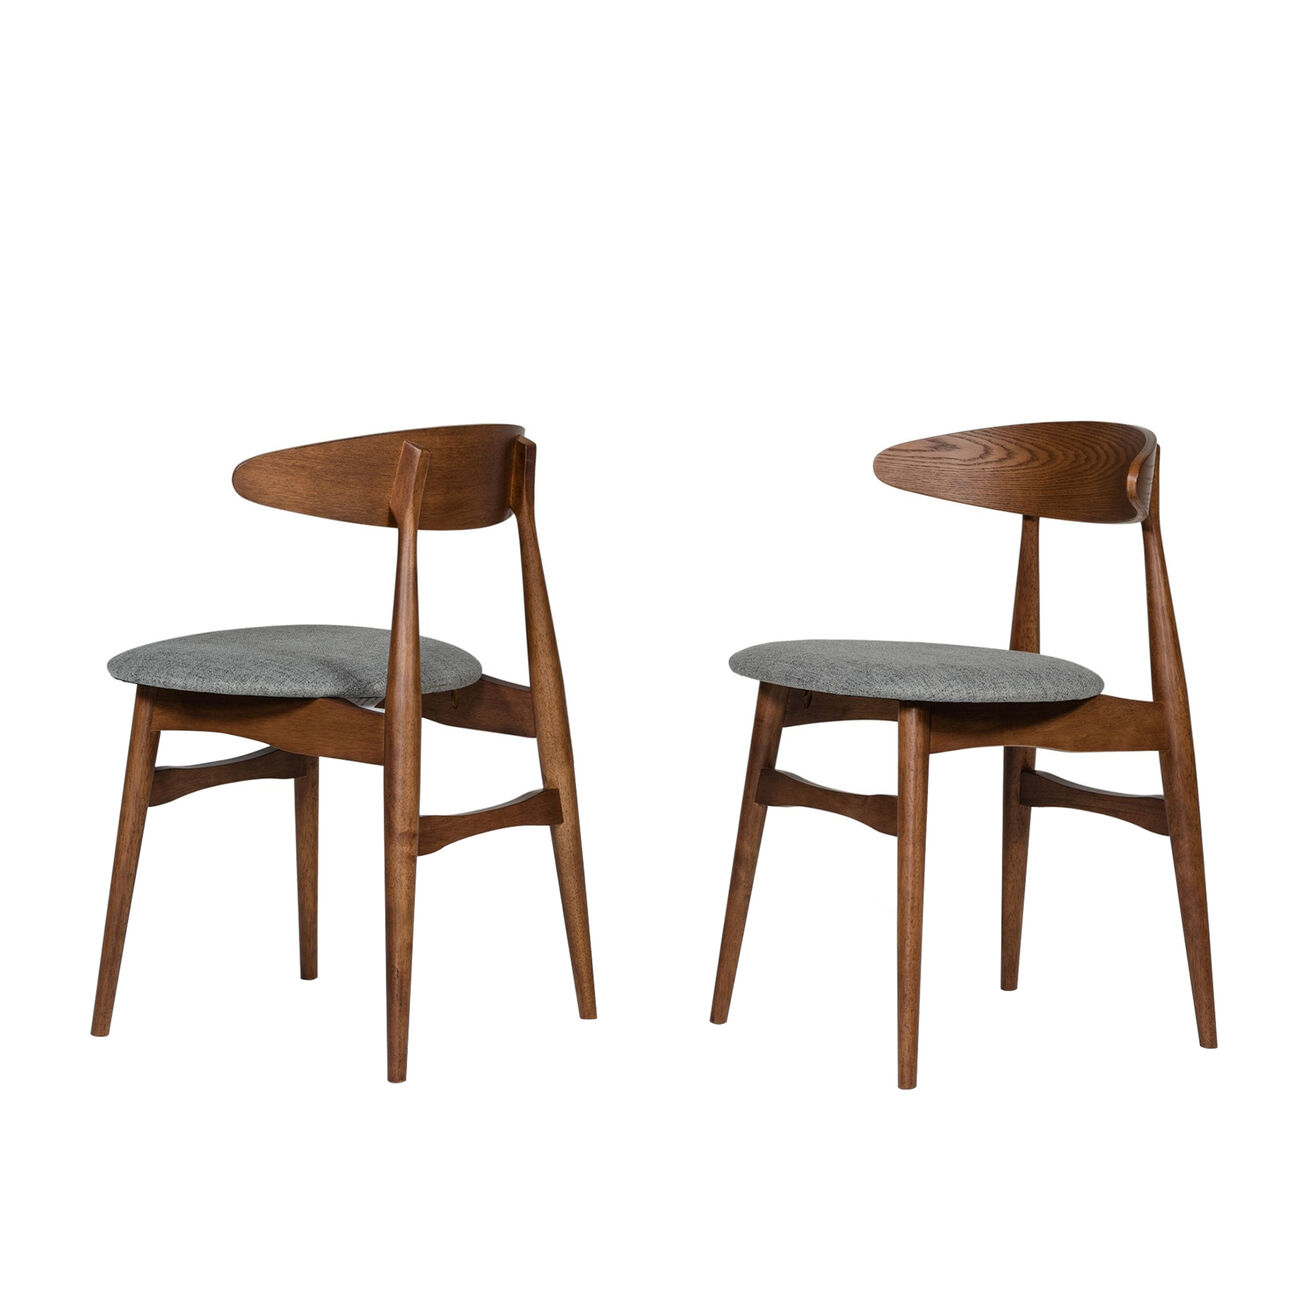 Grained Wooden Dining Chair with Padded Seat, Set of 2, Gray and Brown